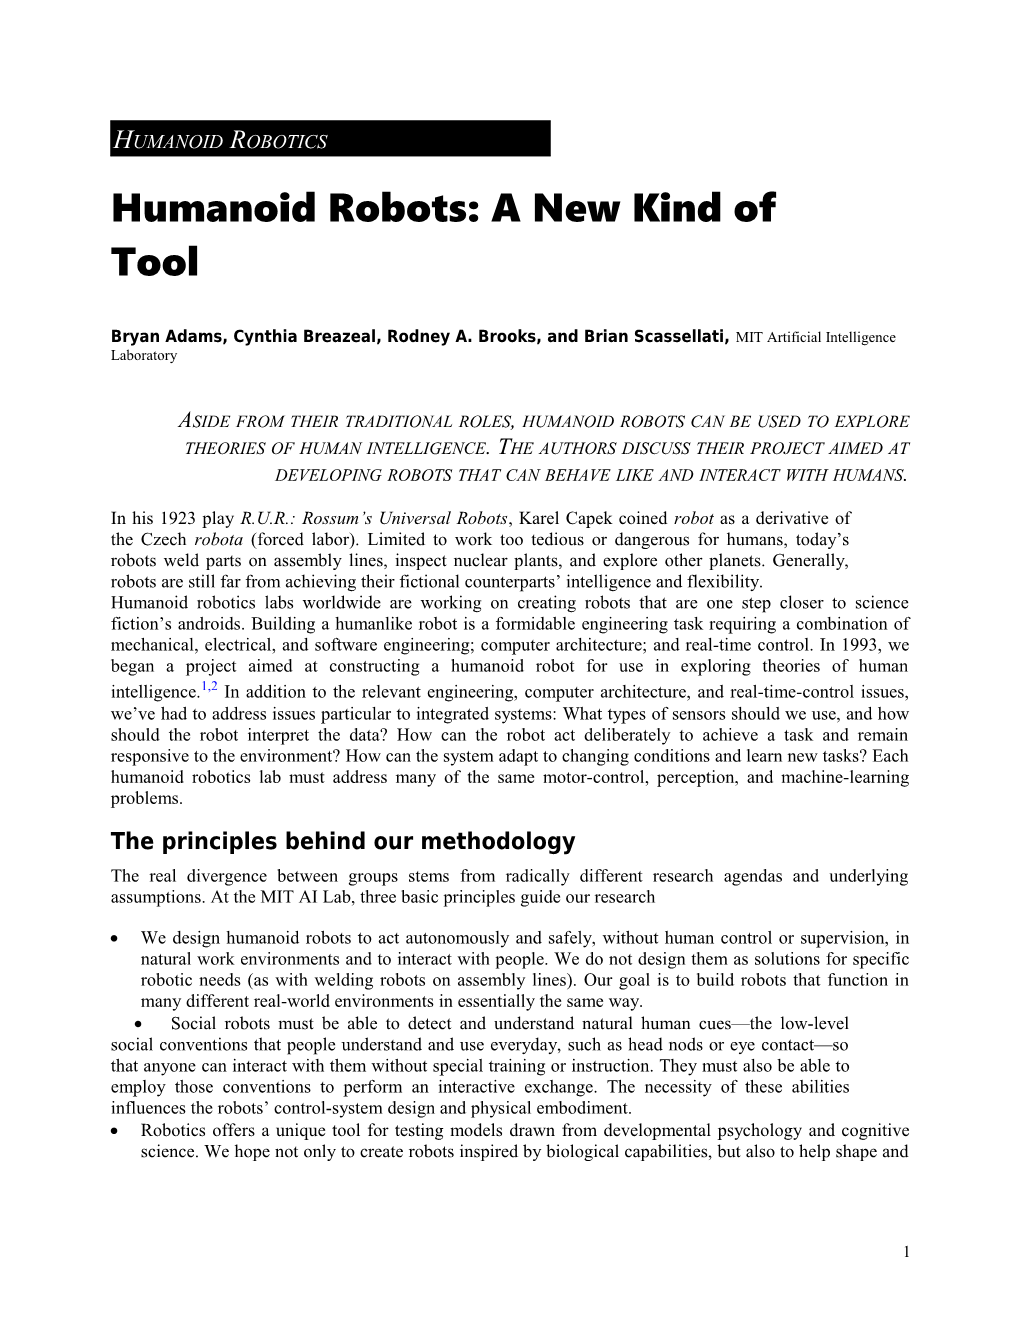 Humanoid Robots: a New Kind of Tool